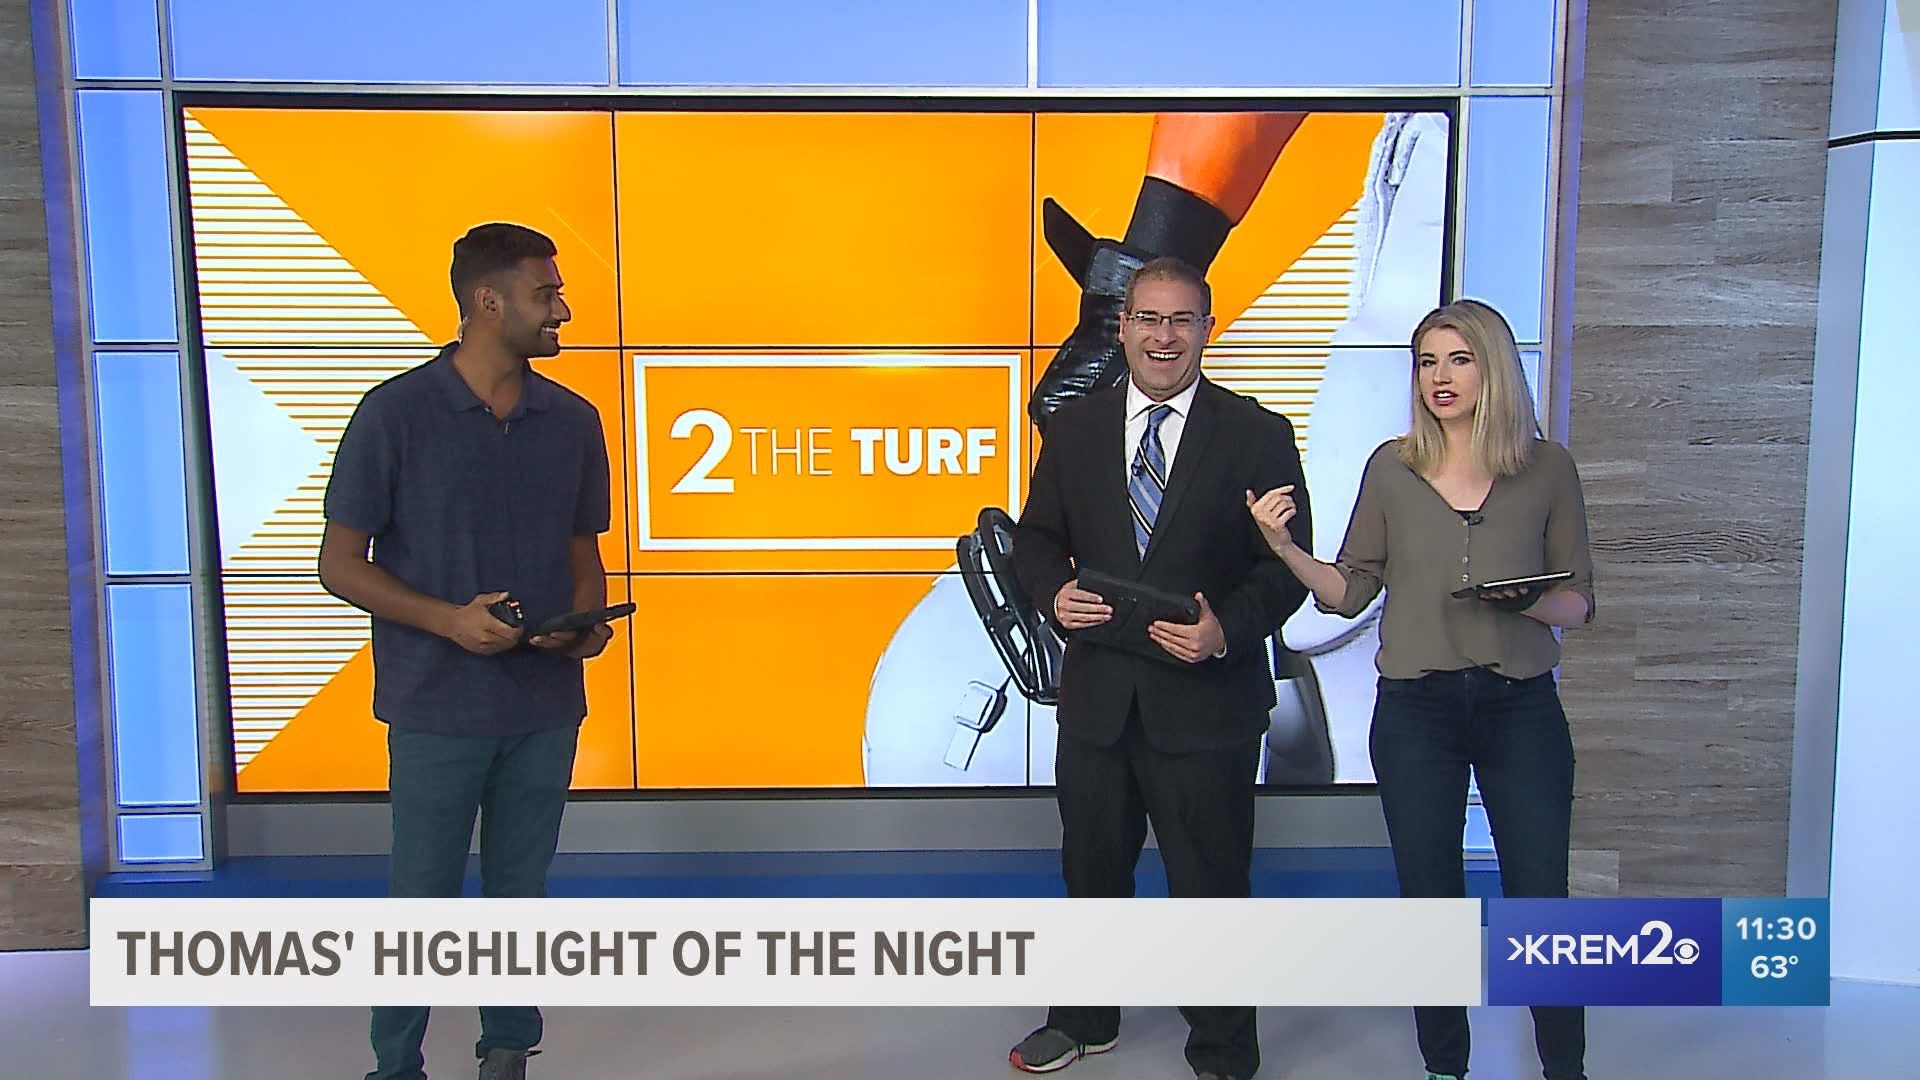 Meteorologist Thomas Patrick joins the 2 the Turf crew for his highlight of the night.